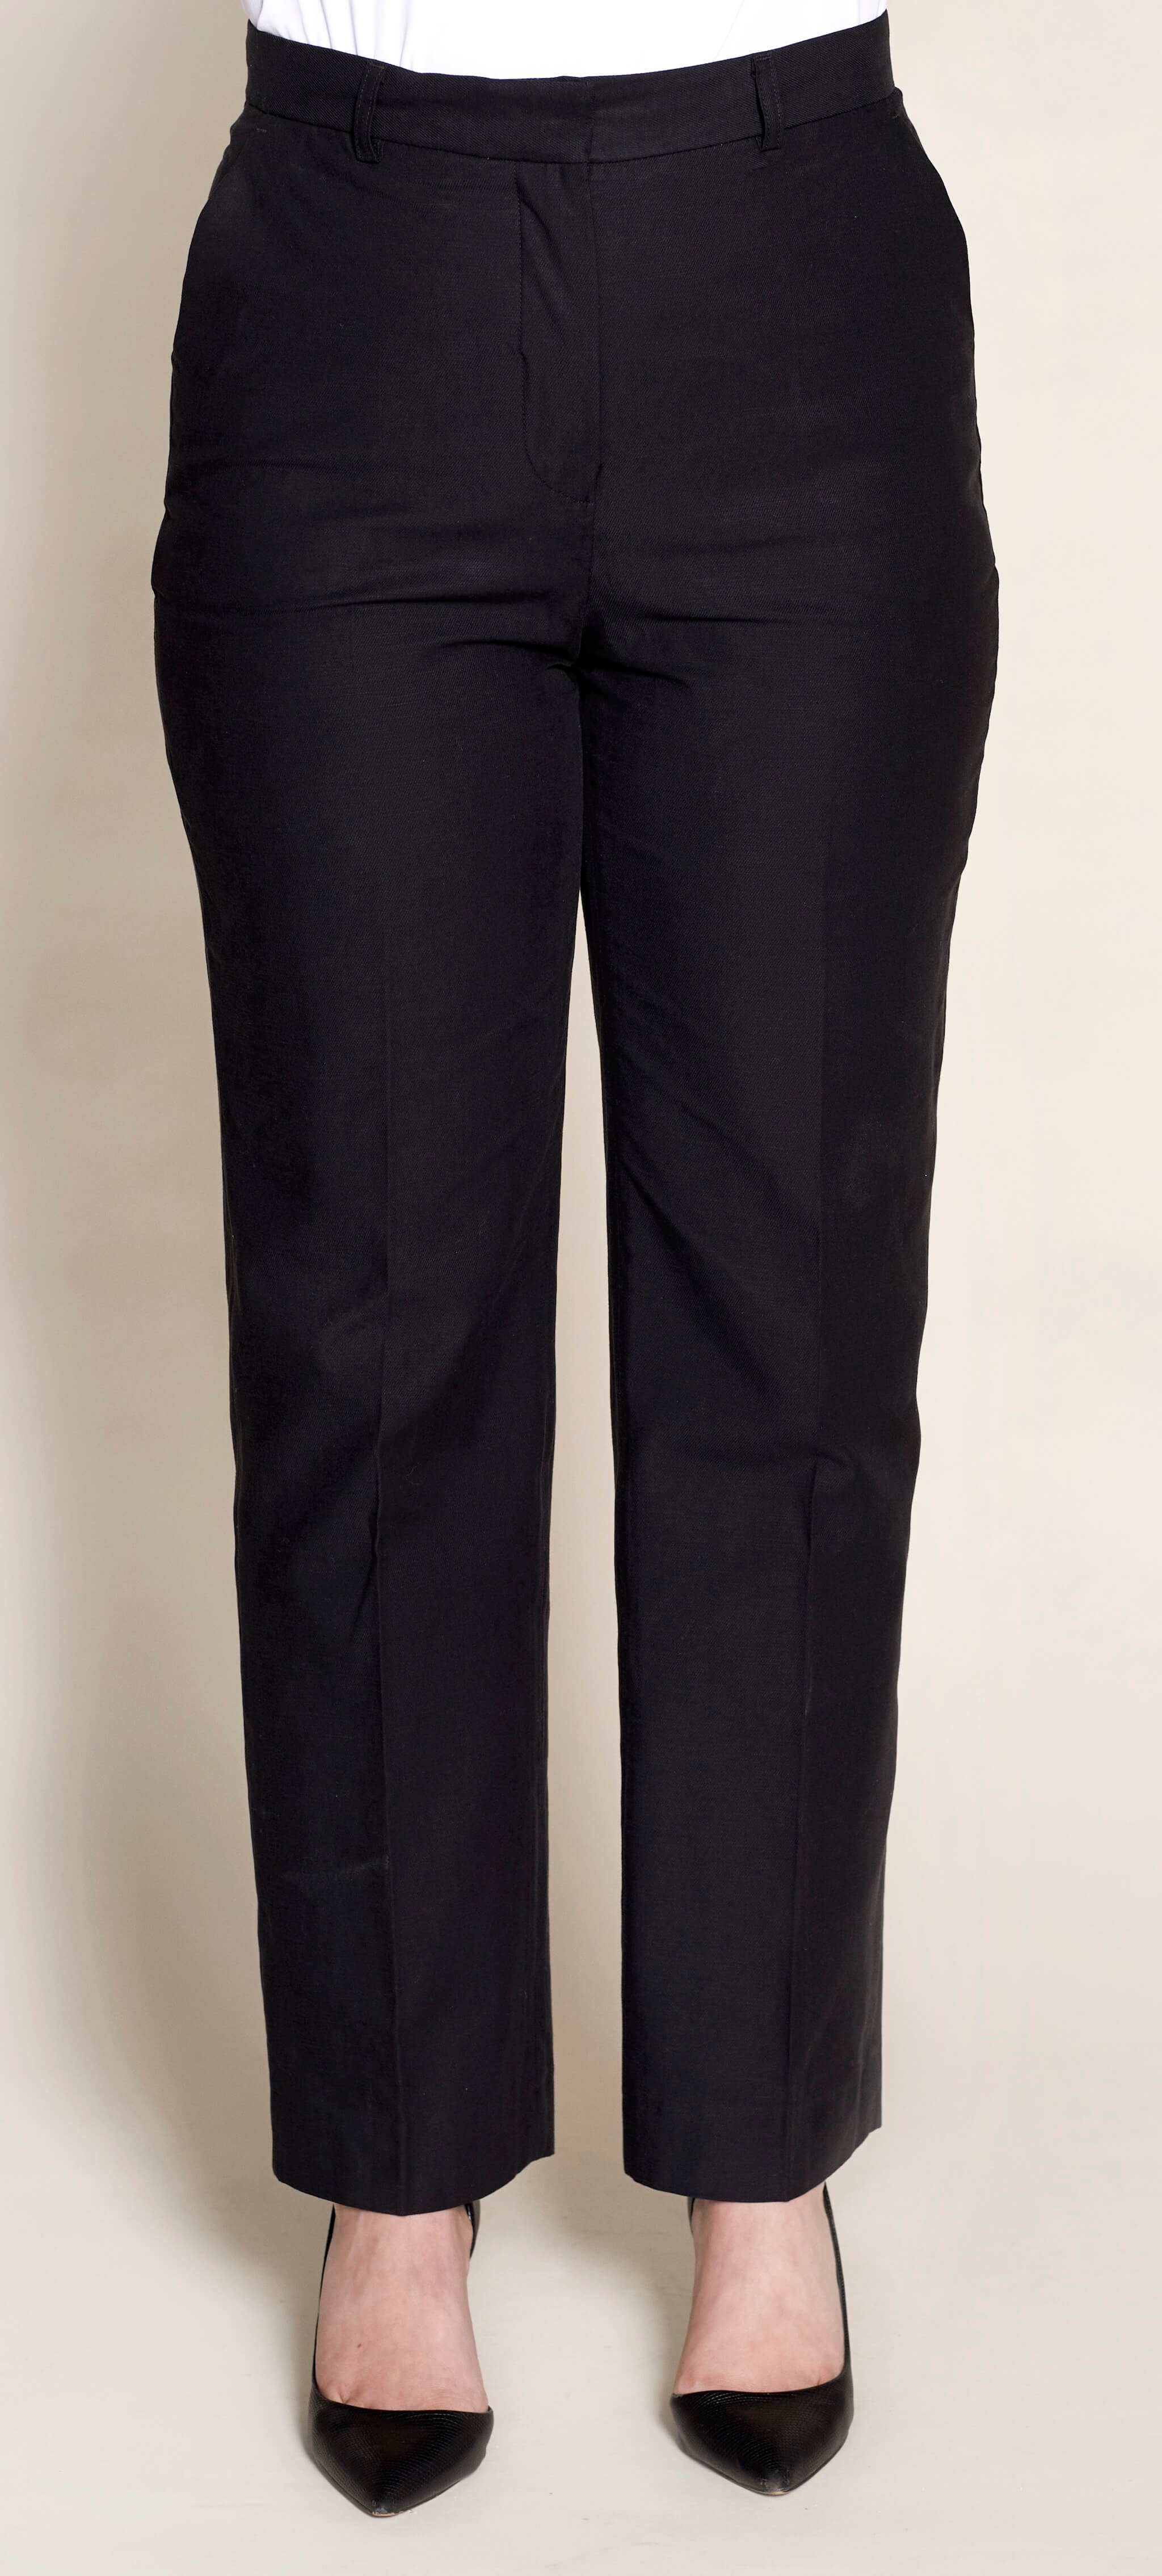 Elegant black trousers from Cyme Copenhagen also available in plus-size, crafted from natural materials like lyocell, demonstrating the brand's commitment to timeless design and sustainable, inclusive fashion.